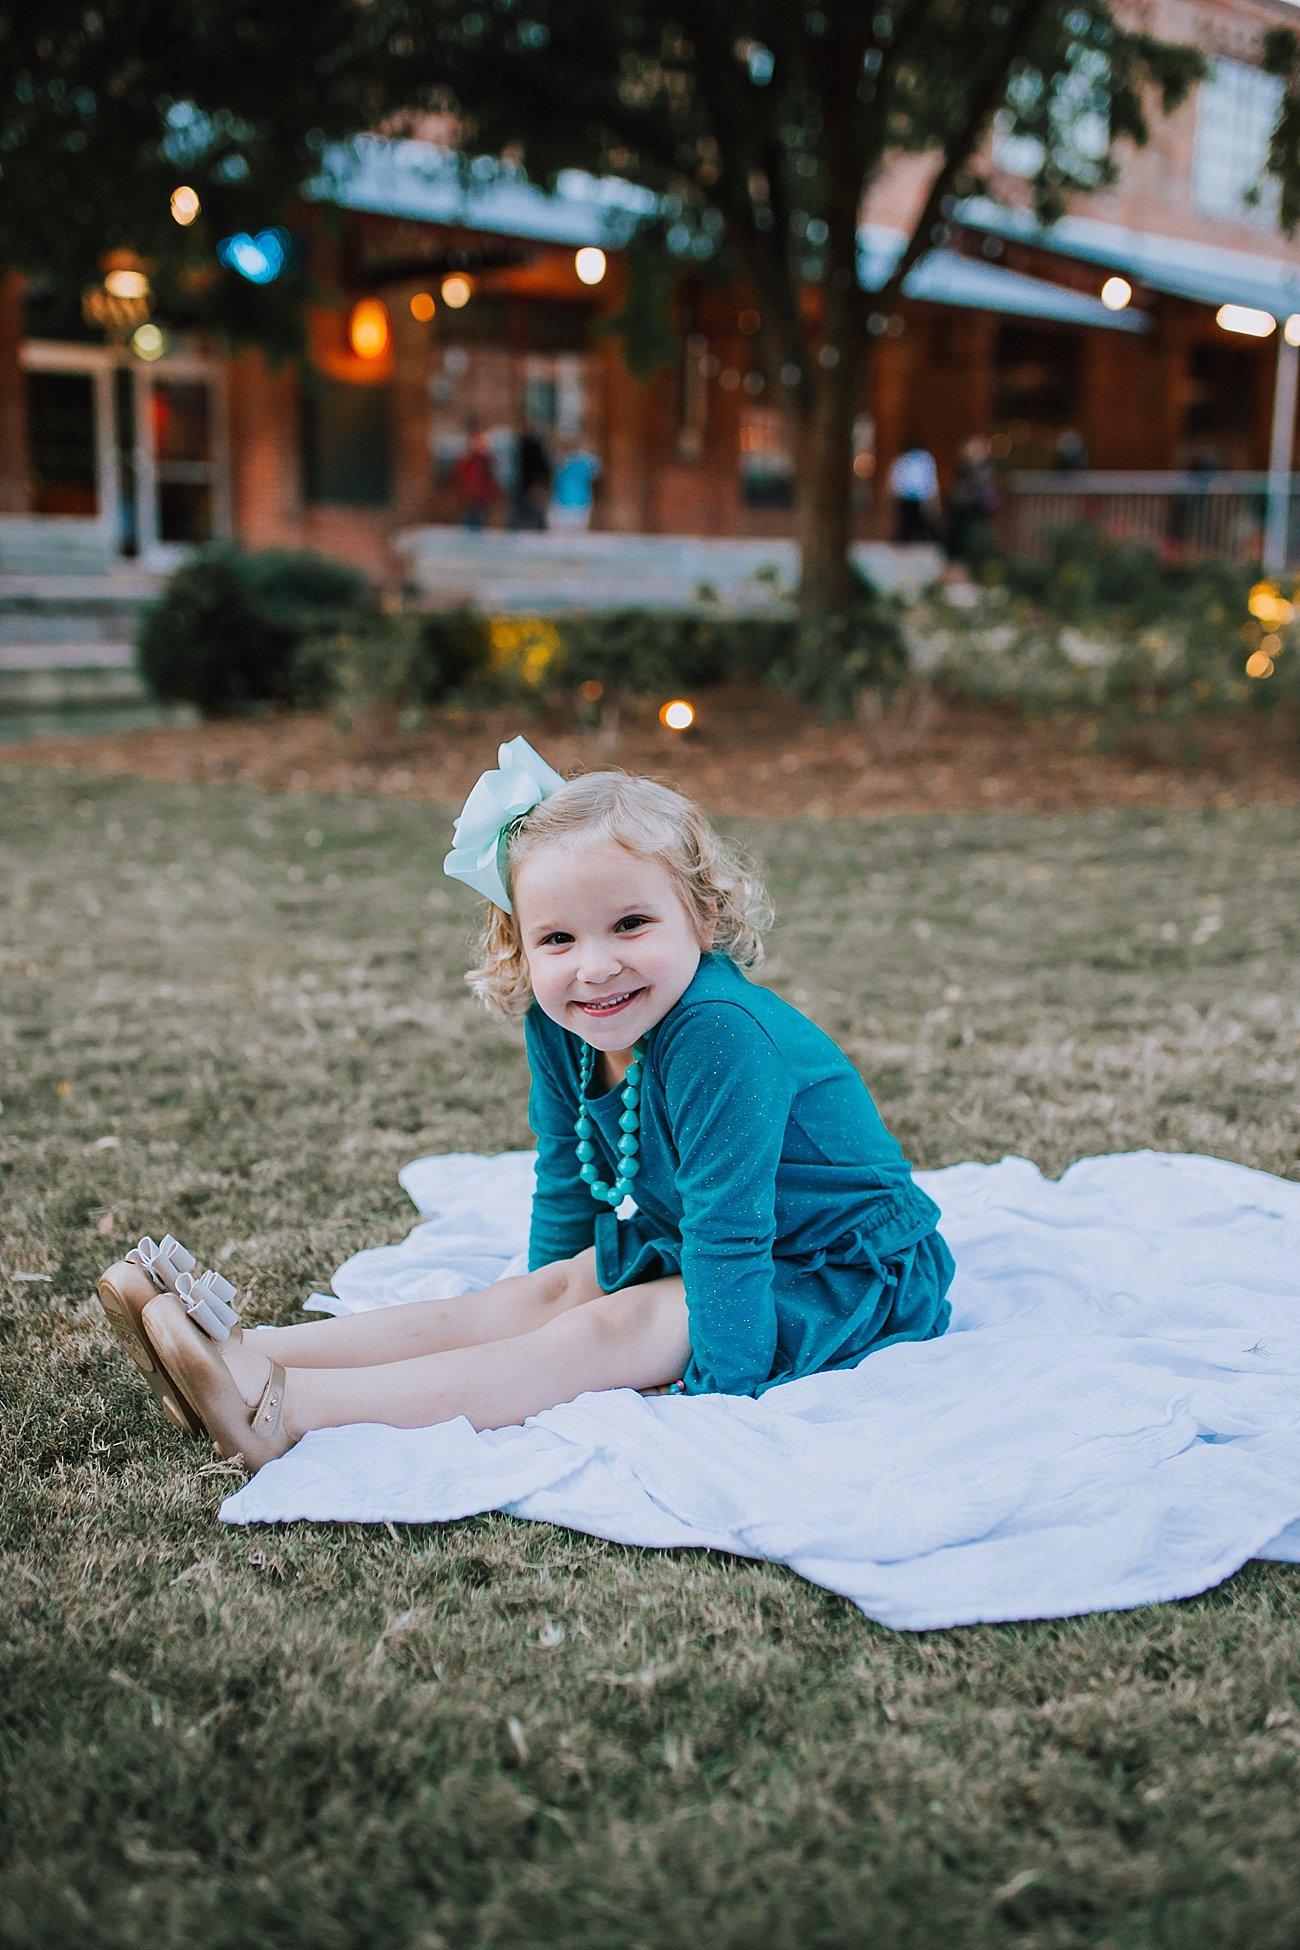 Family Photography - Durham, North Carolina - The Wild Bloom Photography - Stillman Family Photos 2017 (10) - Our Christmas Family Pictures by popular North Carolina blogger Still Being Molly